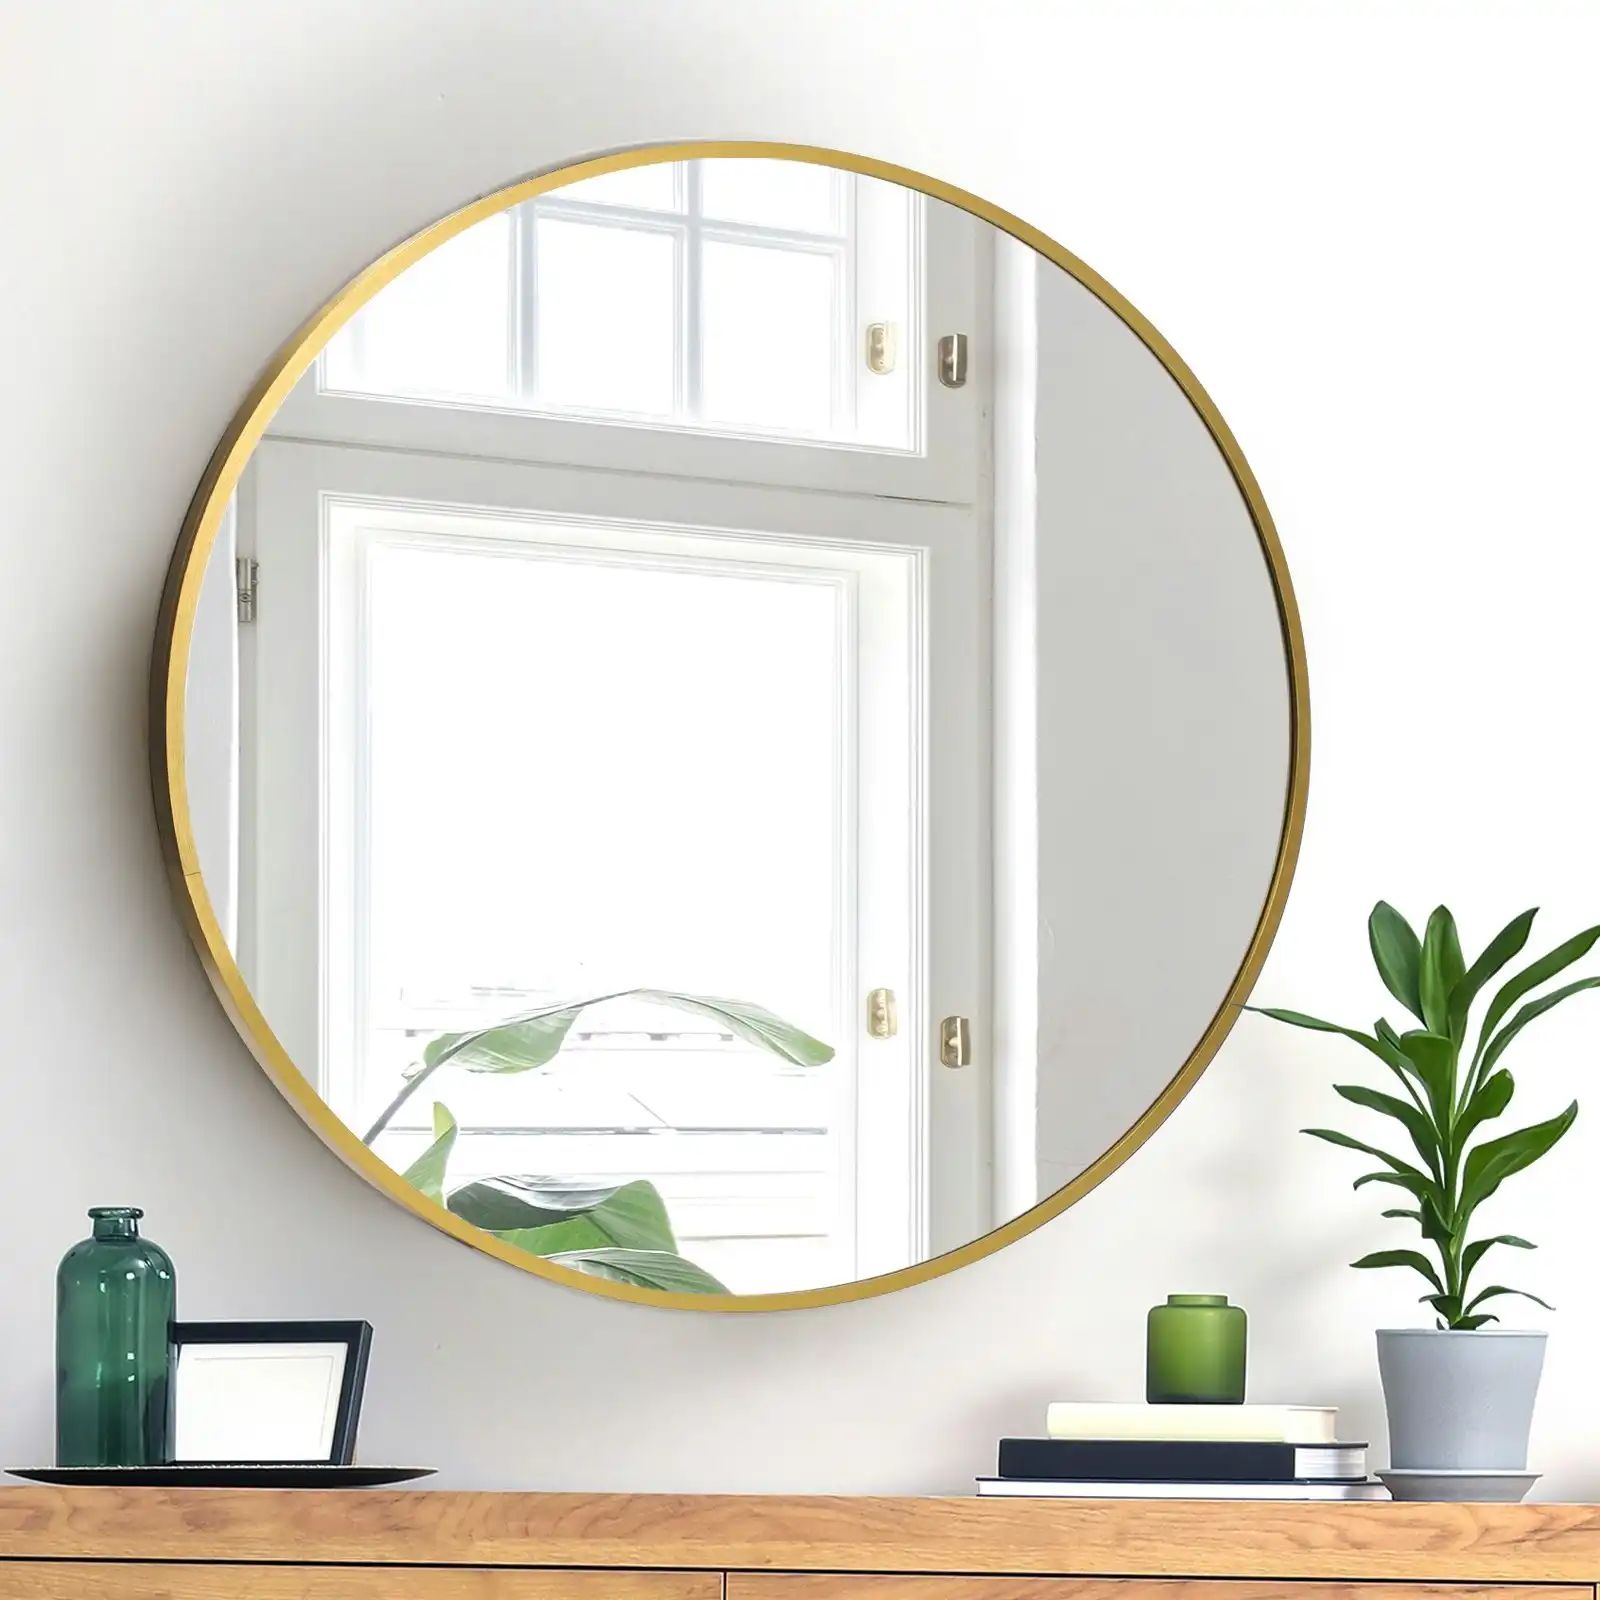 Oikiture Wall Mirrors Round 70cm Makeup Mirror Vanity Home Decro Gold Bathroom